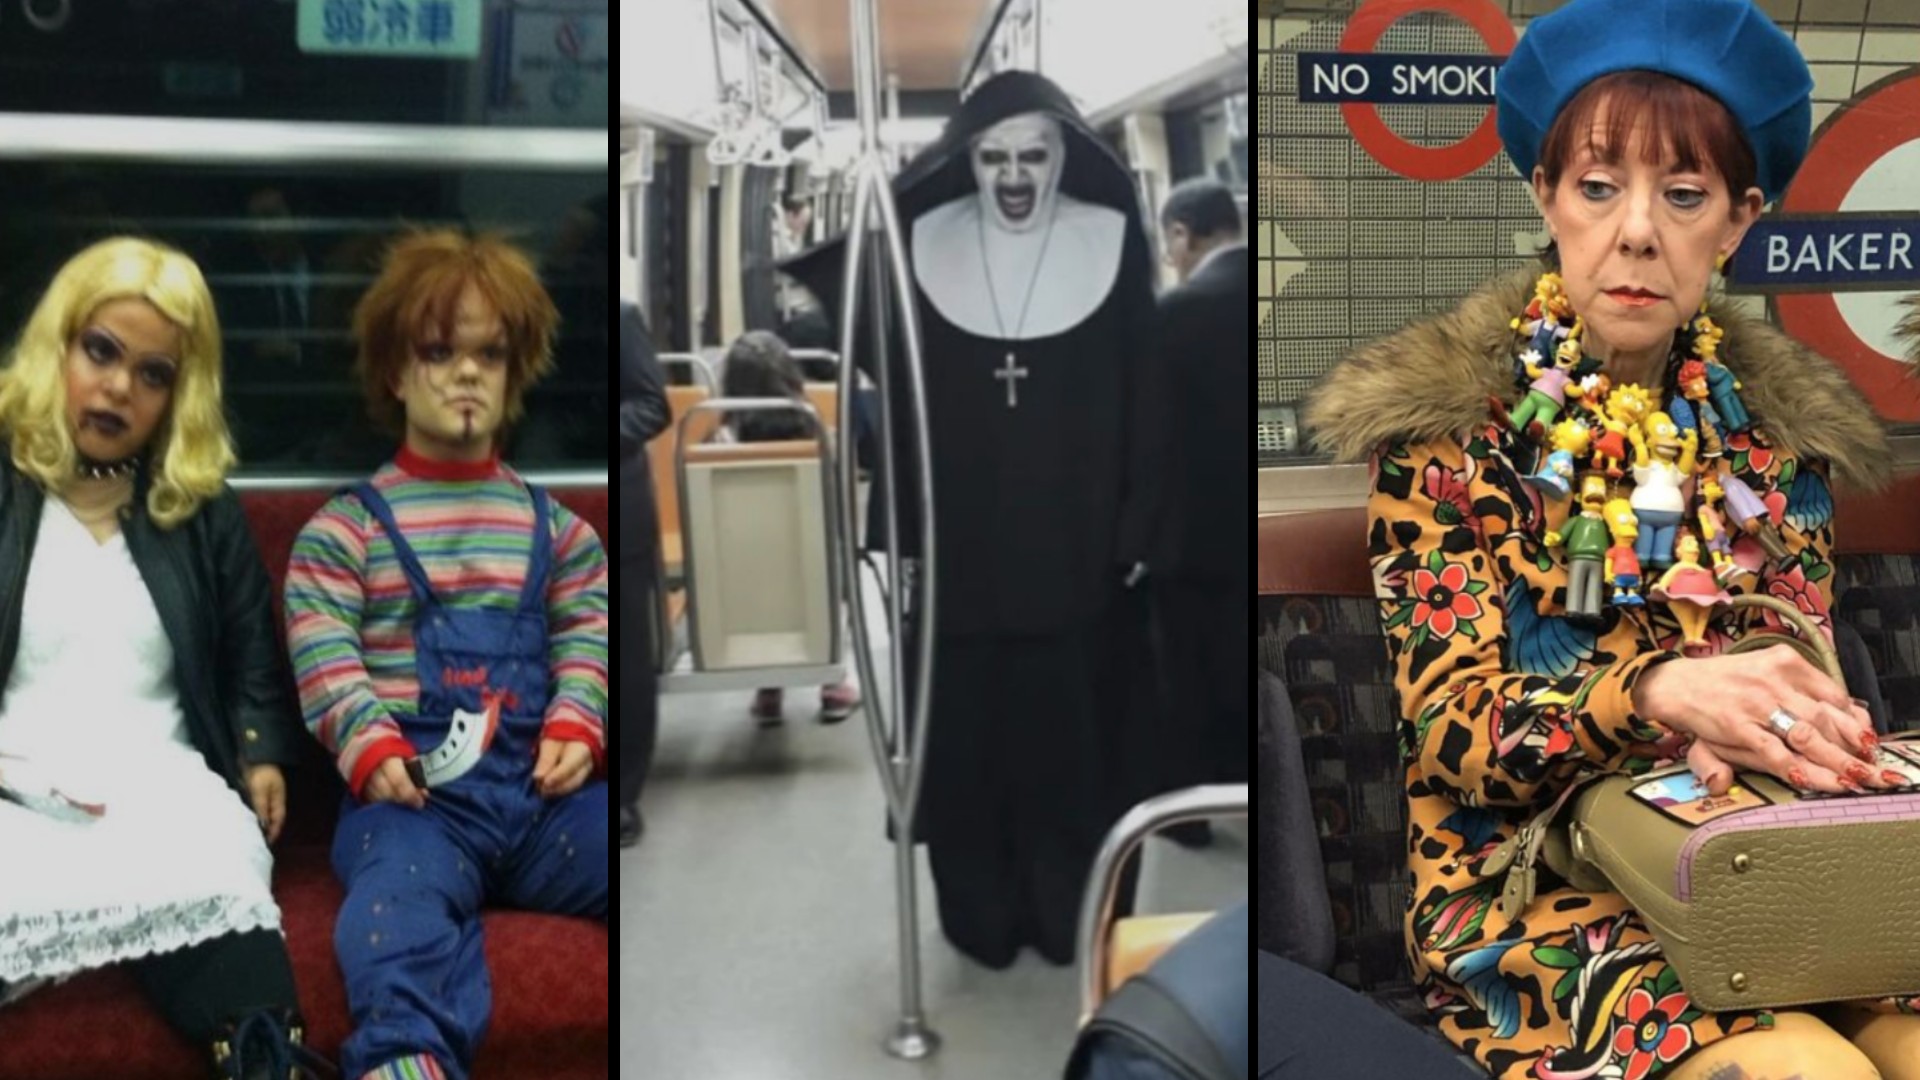 A triple-panel image. The first panel shows a person in eerie makeup dressed like a doll and another as a horror character in a subway. The second features a person as a sinister nun on a subway. The third is a woman, colorfully clothed, wearing numerous items, in a subway.